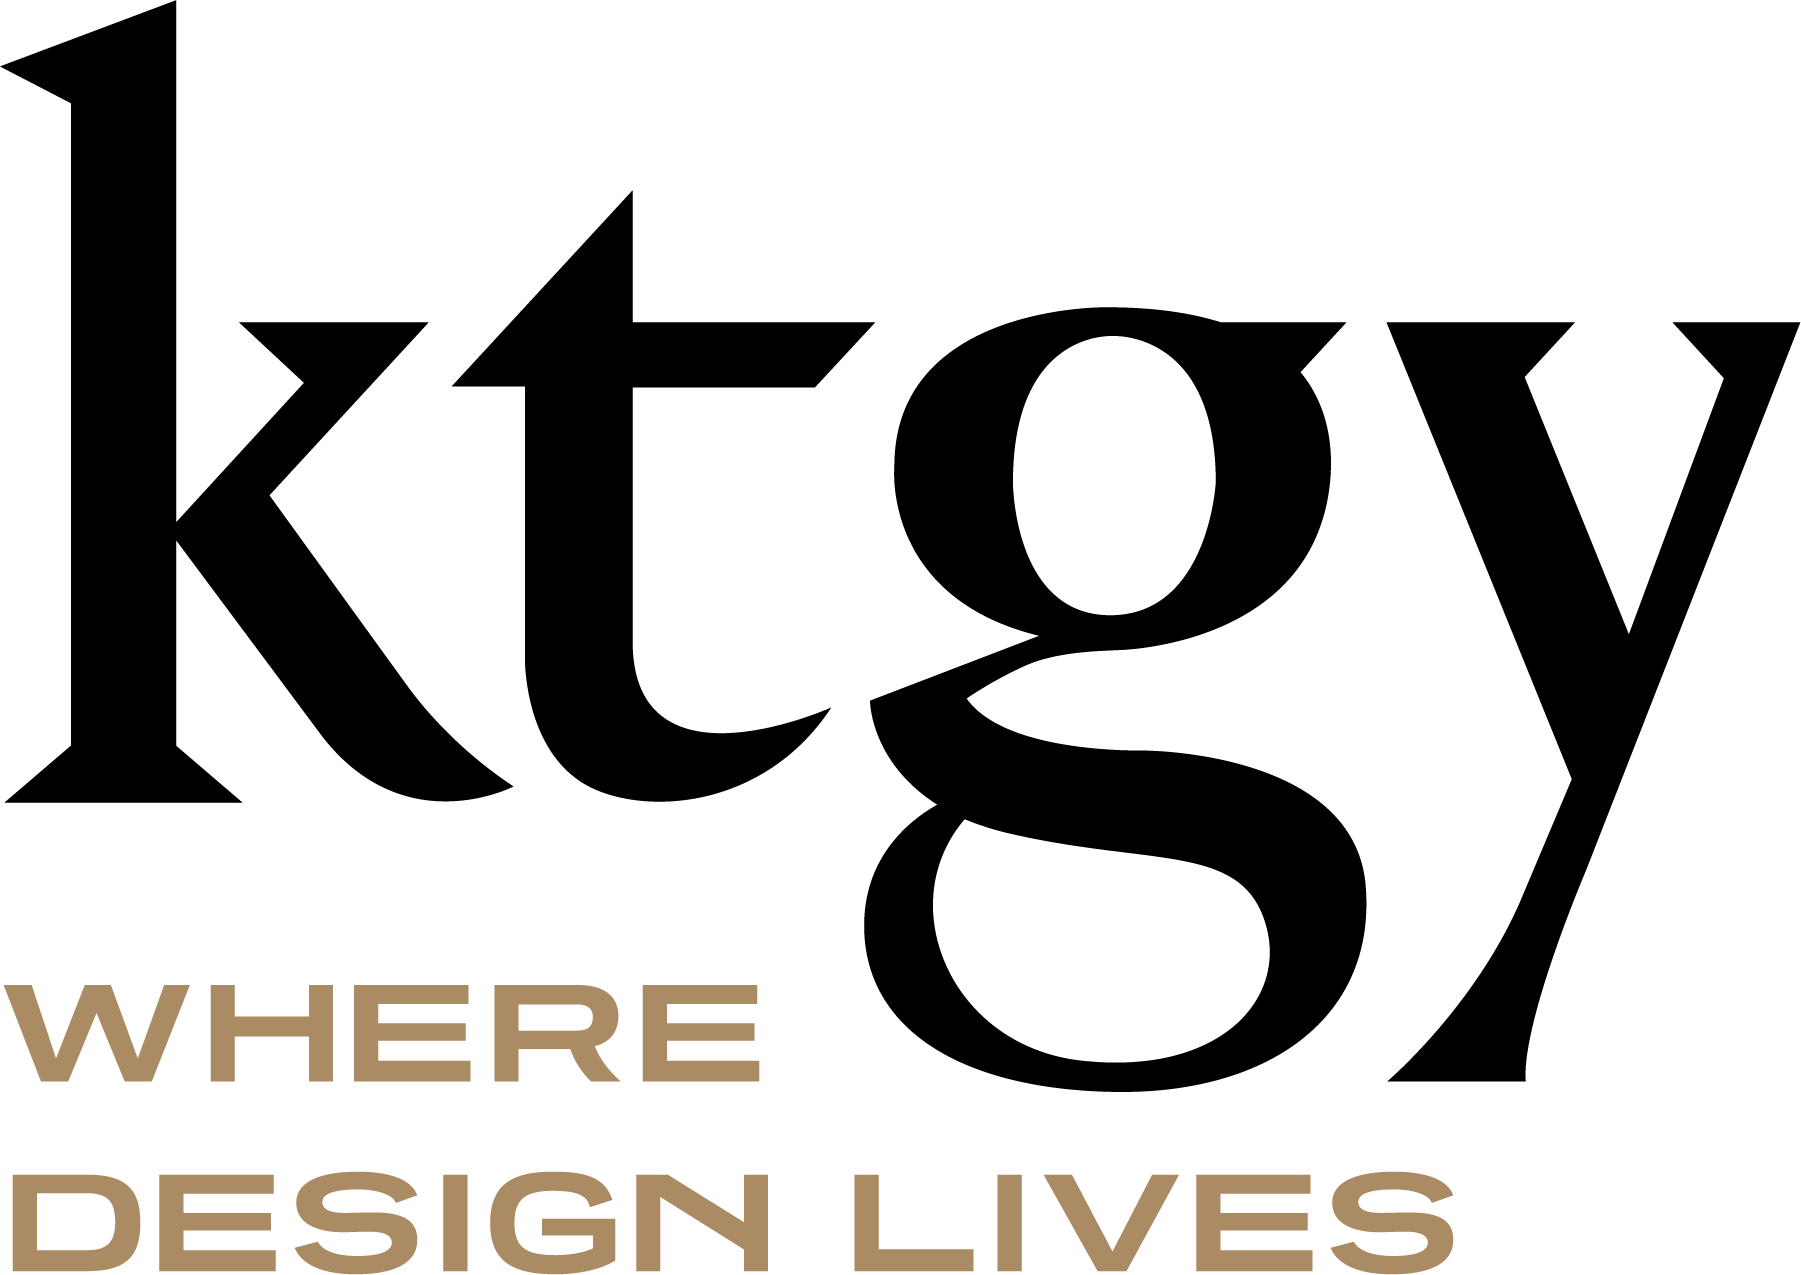 "Where Design Lives:" KTGY Celebrates the Debut of an Evolved Mission and Brand Identity